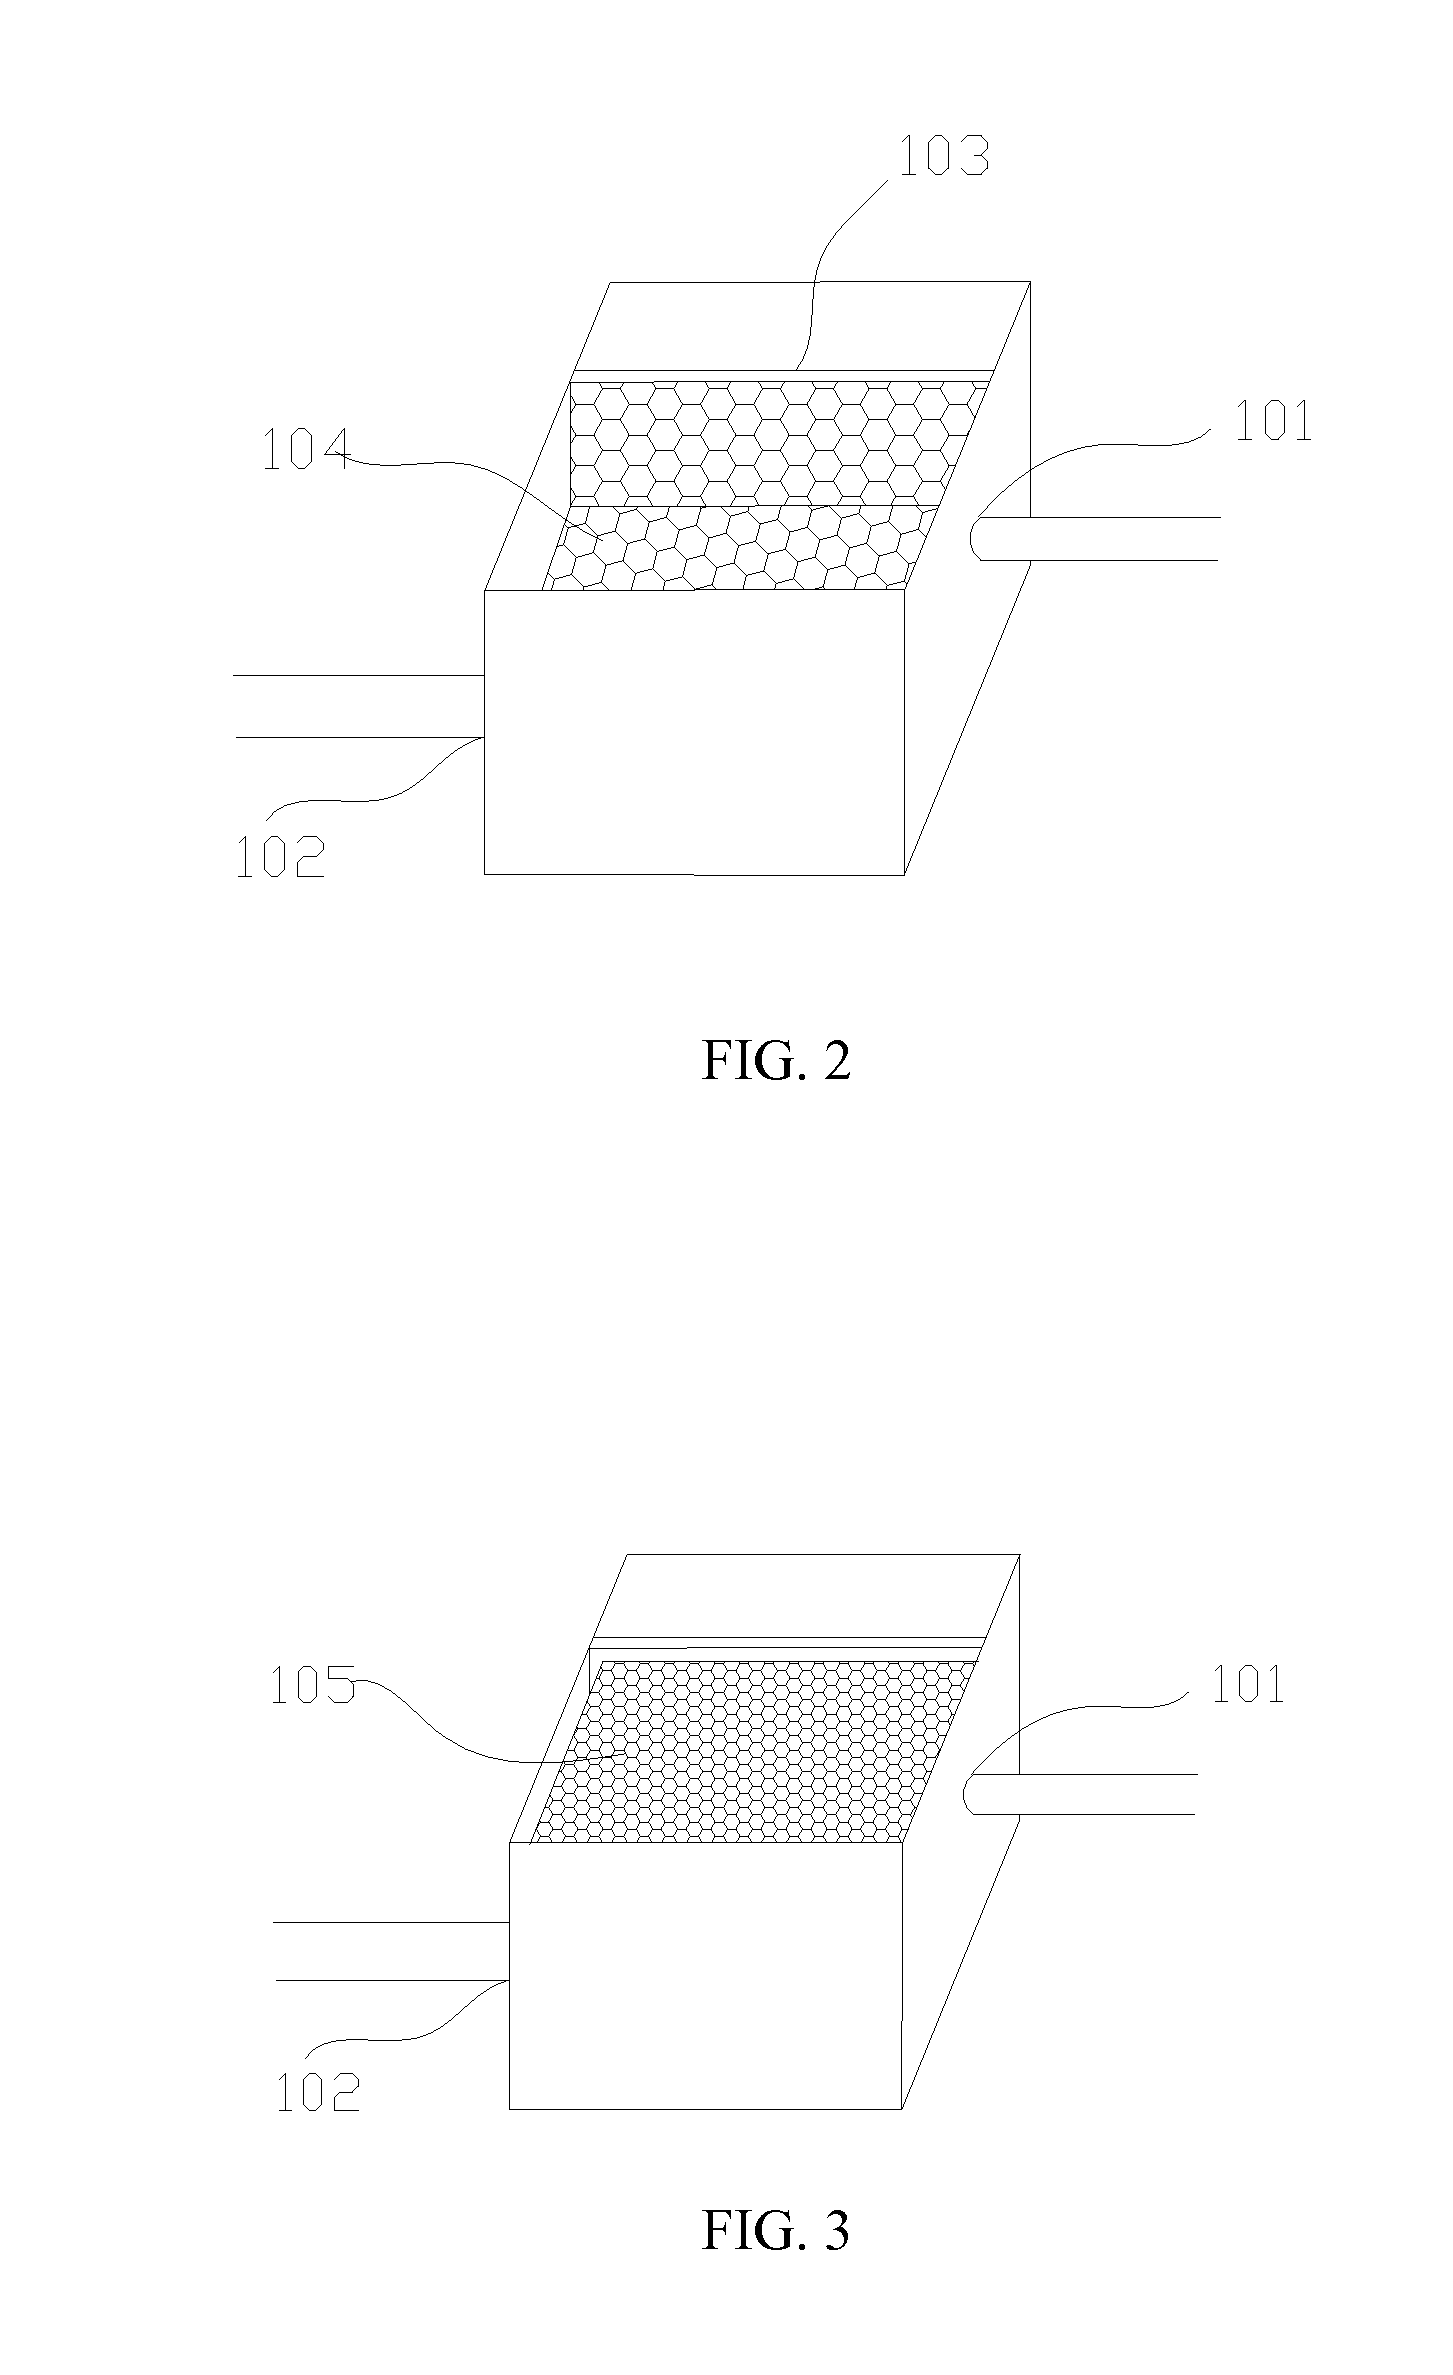 Air Cleaning and Filtering System